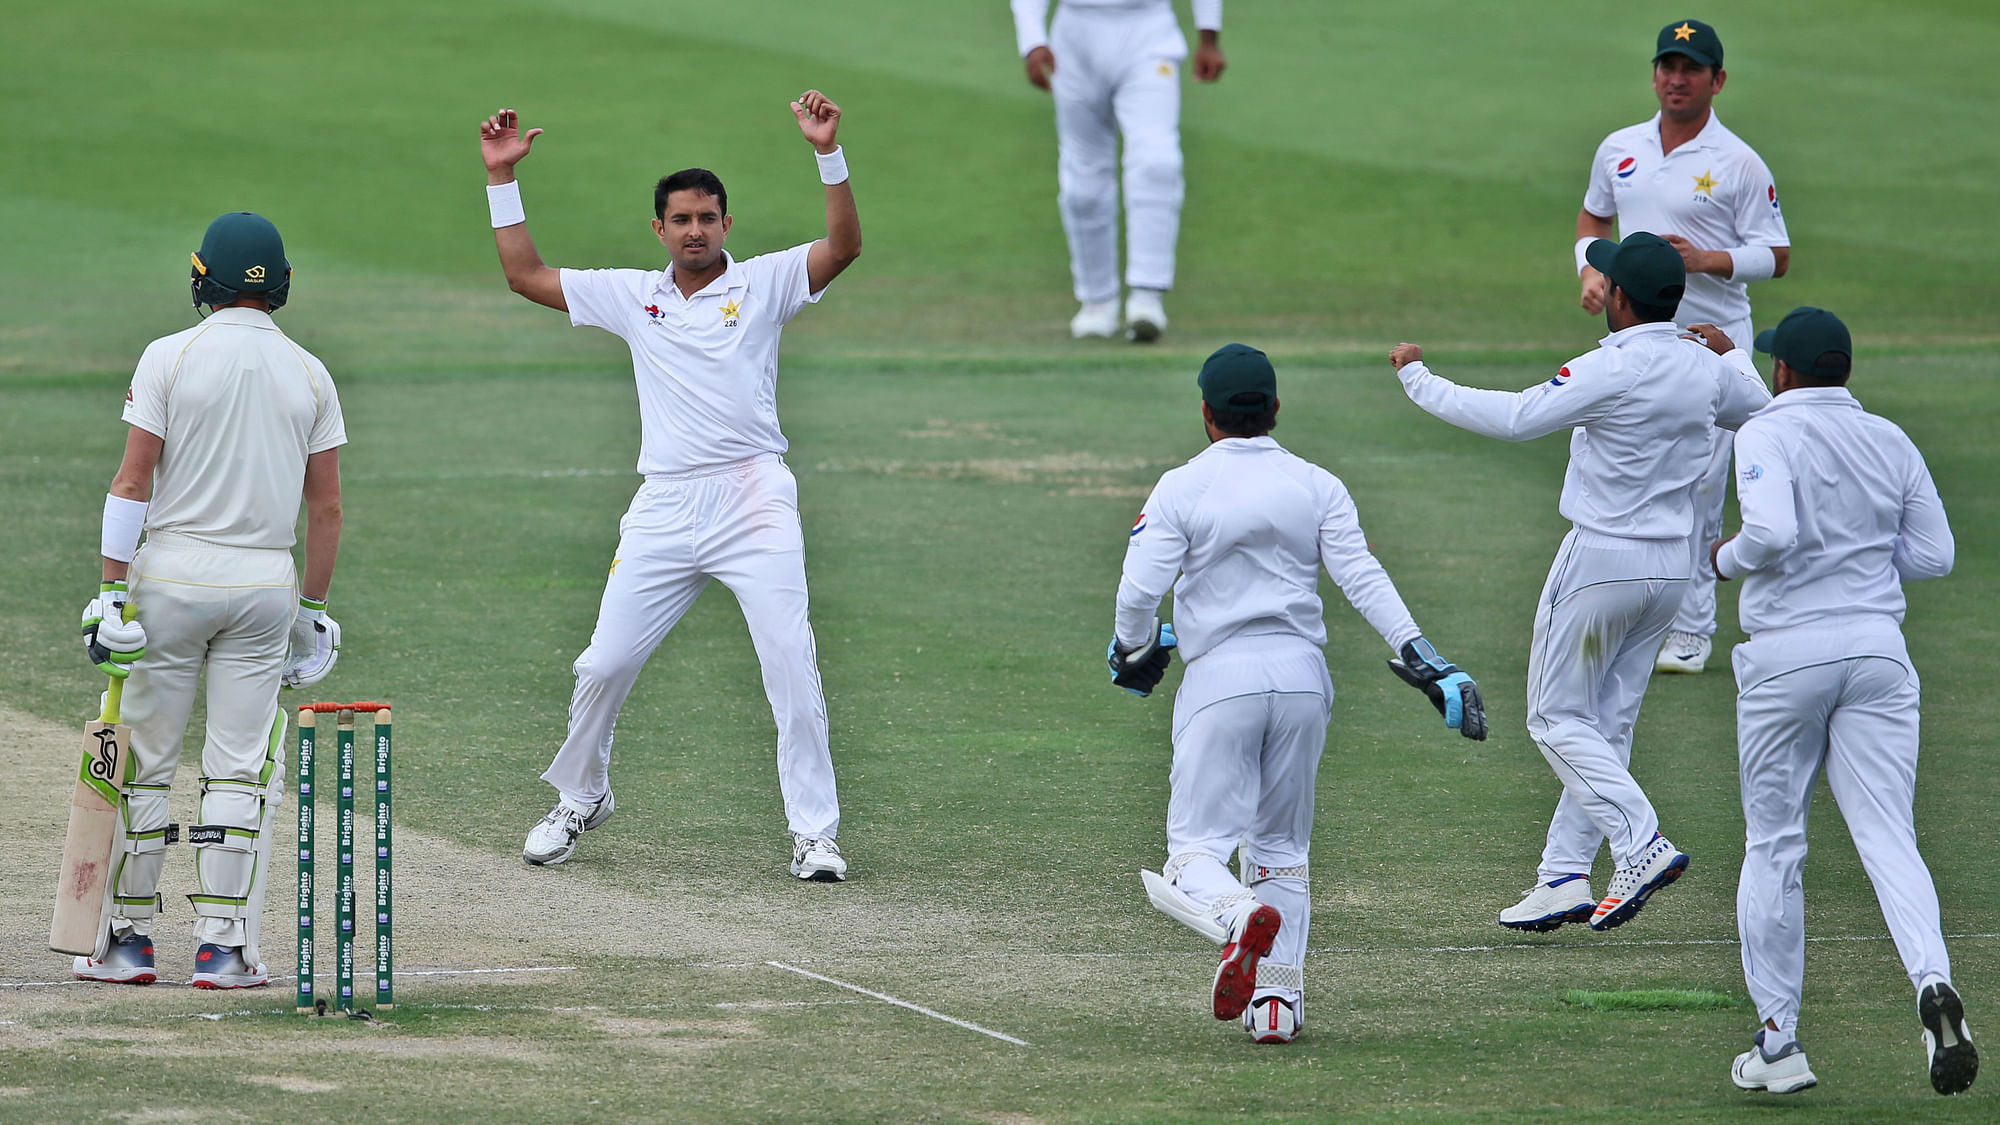 Seamer Mohammad Abbas grabbed a match haul of 10-95 as Pakistan recorded an emphatic 373-run victory over Australia in the second Test.